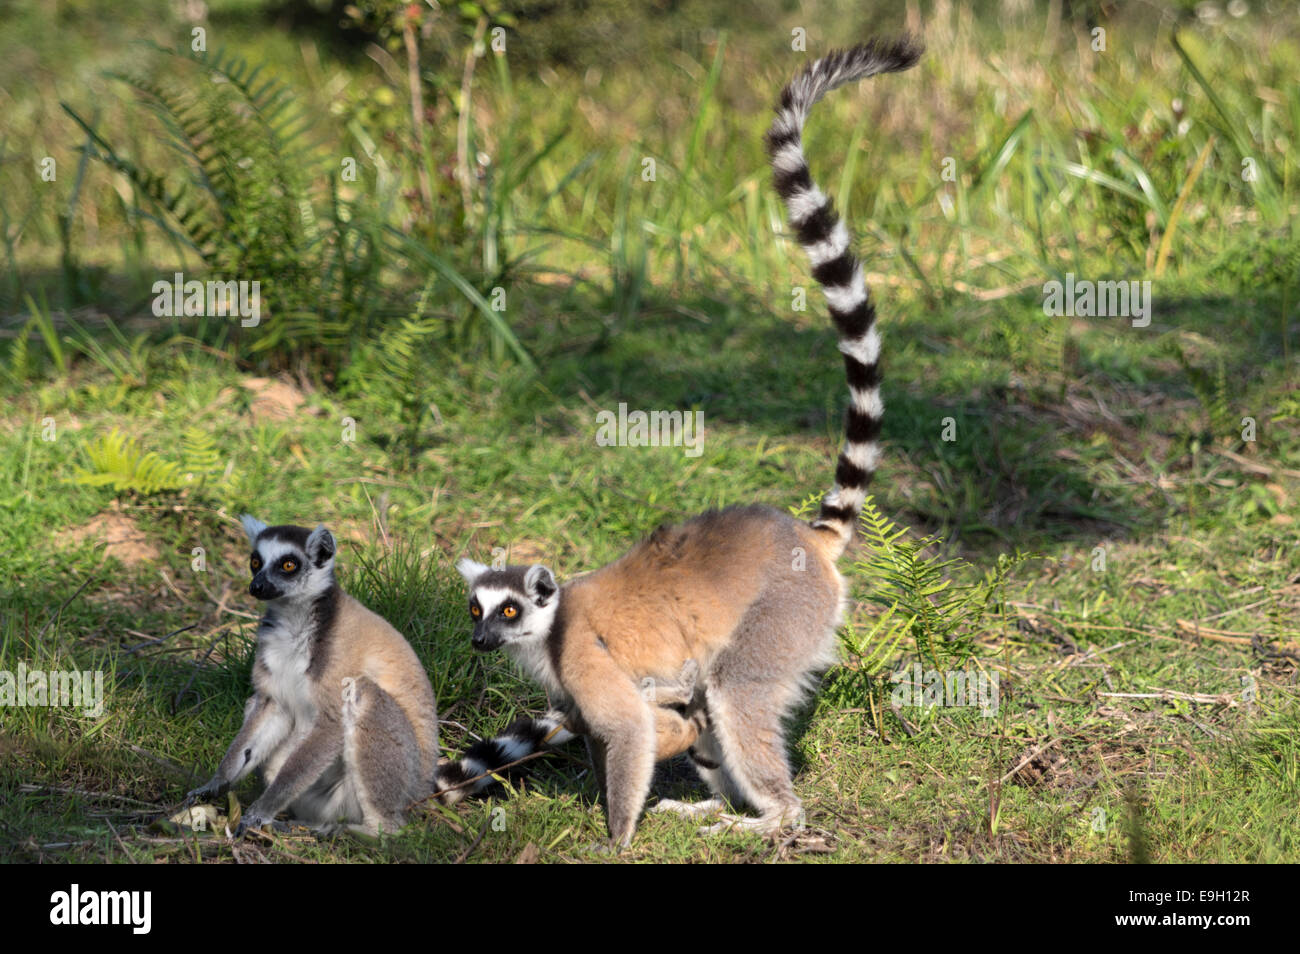 Two ring-tailed lemurs in Madagascar Stock Photo